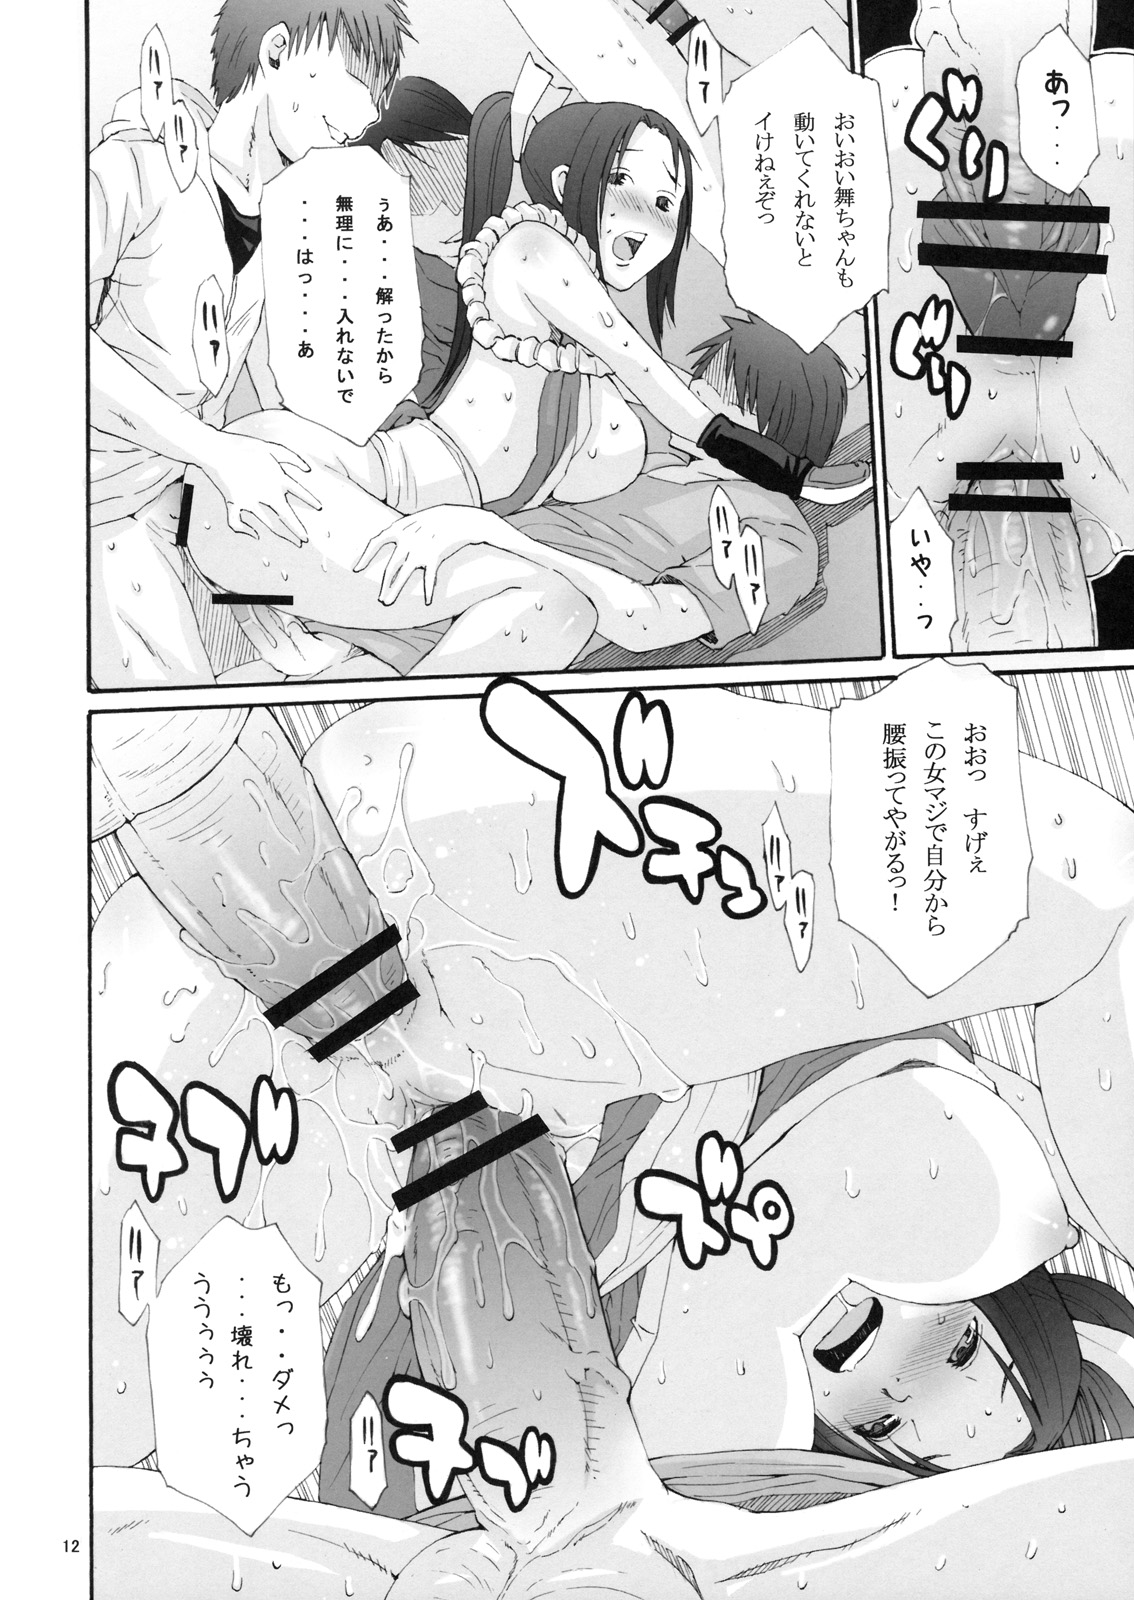 [3g (Junkie)] DOF Mai (King of Fighters) page 11 full